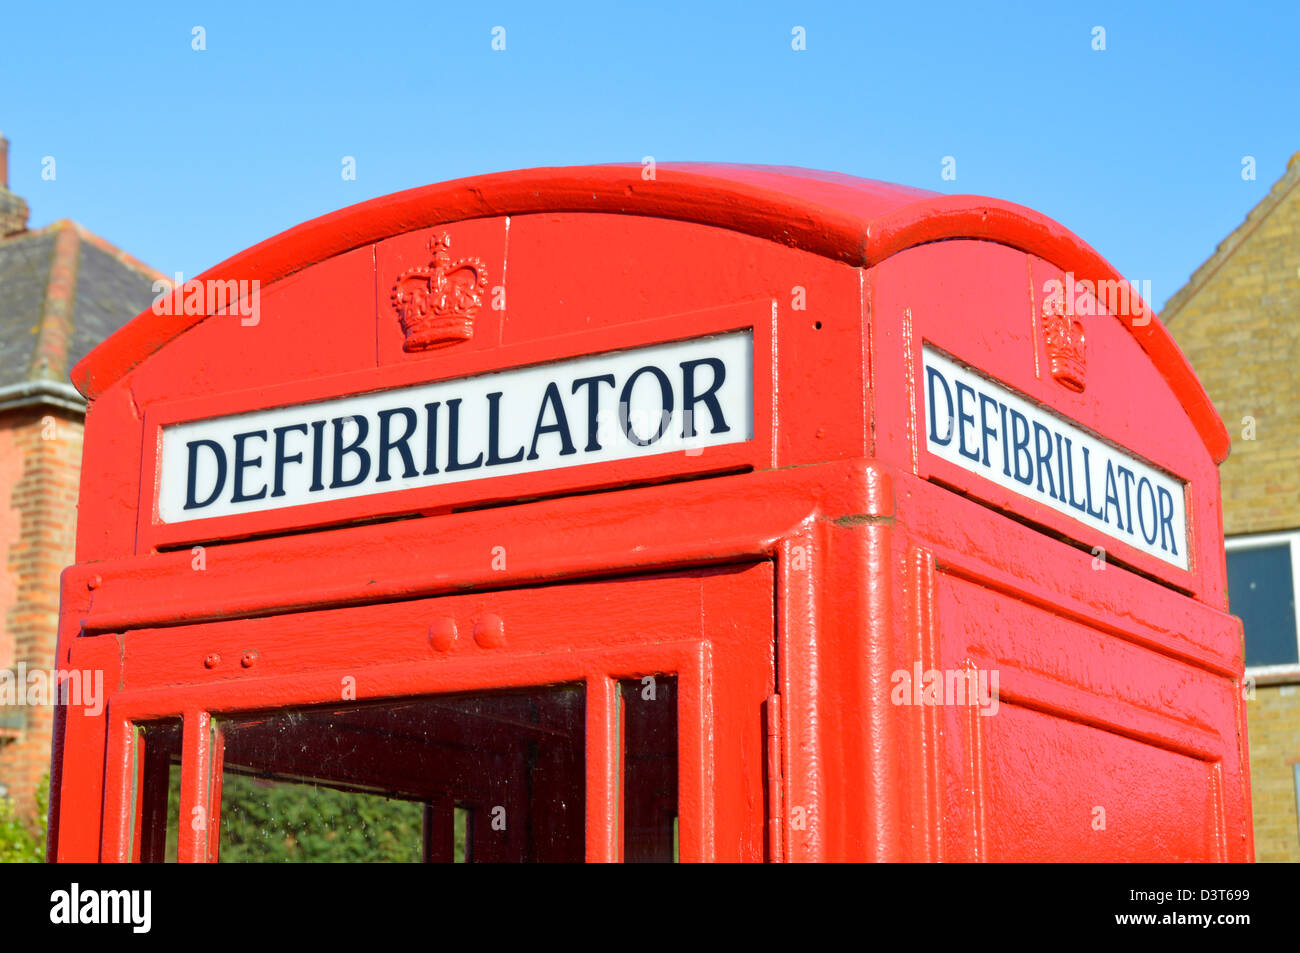 phone-box-changed-to-defibrillator-sign-in-red-k6-telephone-kiosk-D3T699.jpg